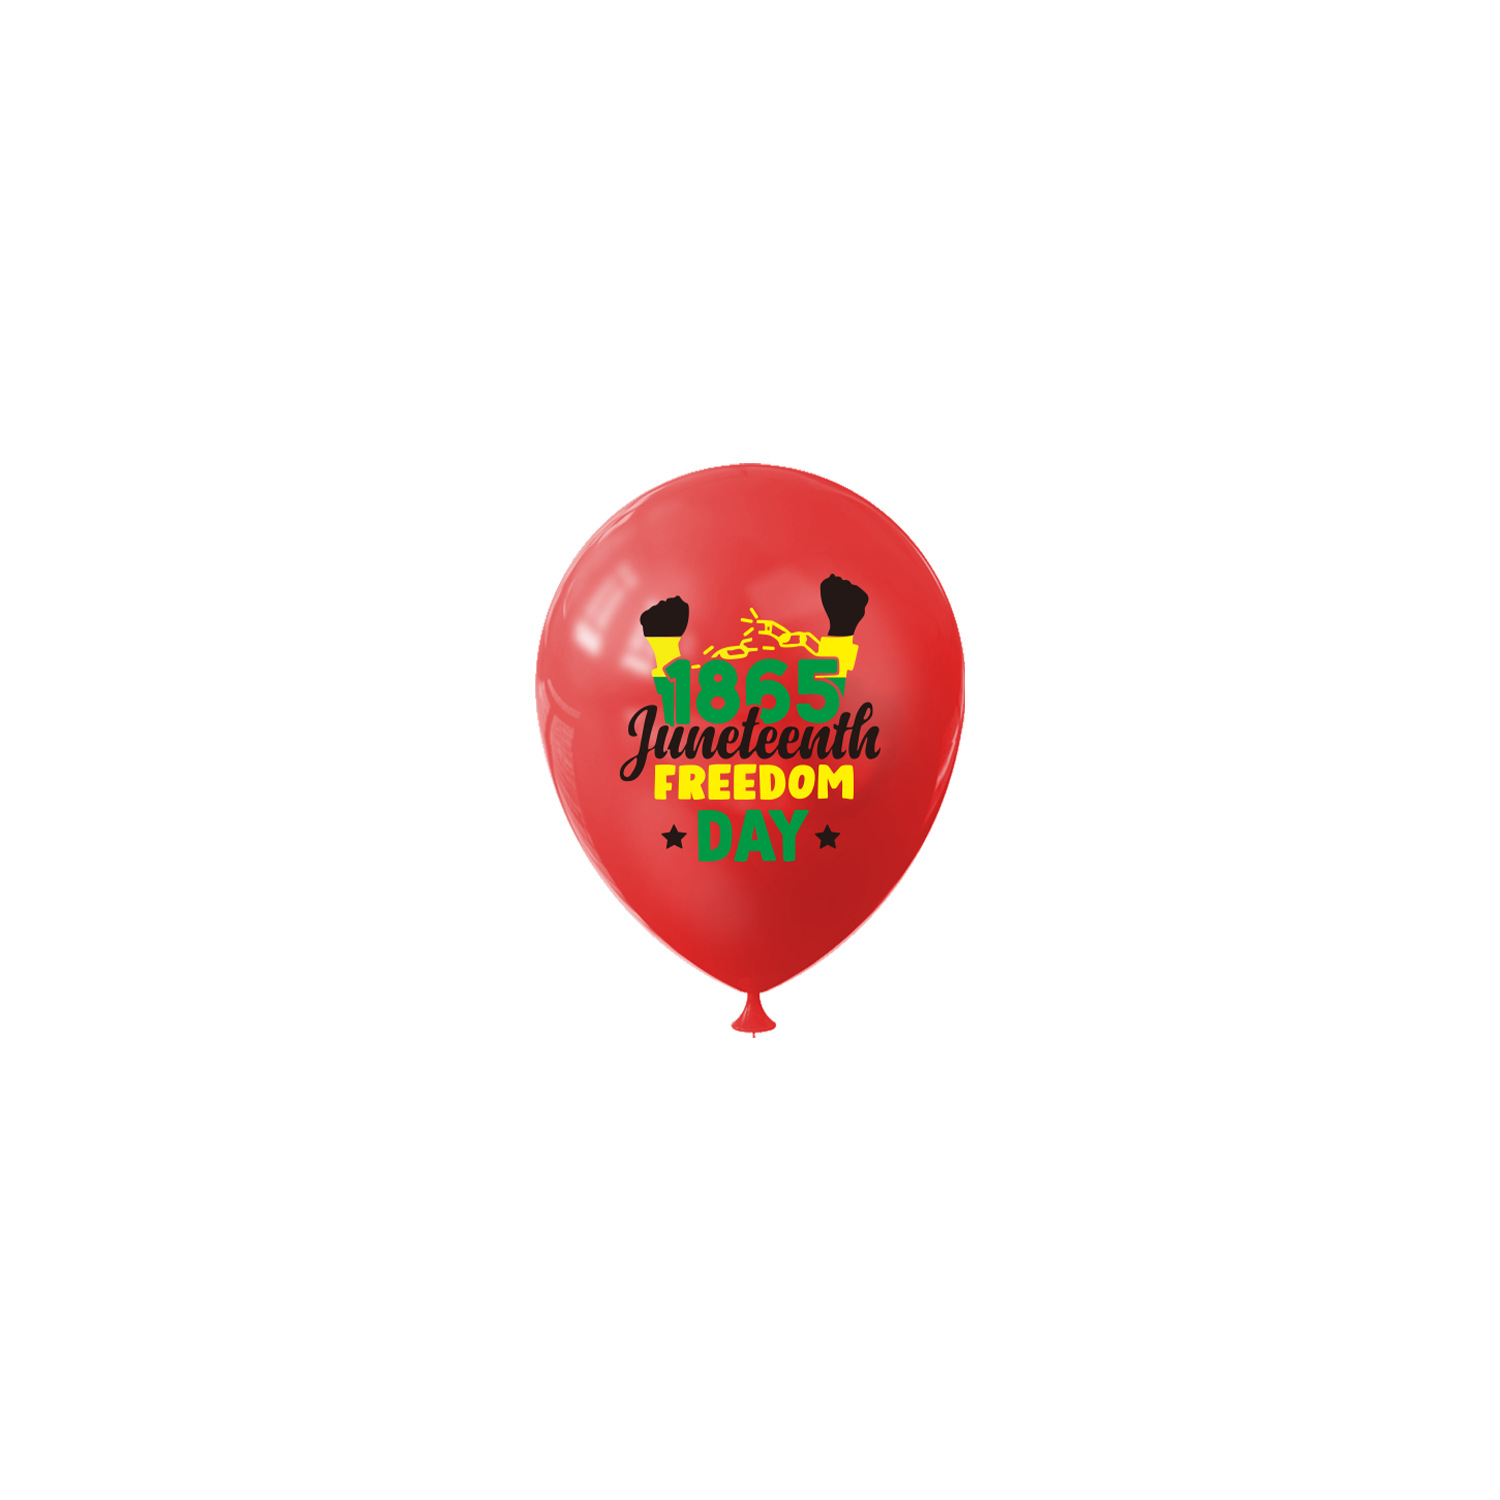 June Festival Party Decoration Supplies Juneteenth Atmosphere Props Festival Balloon 12-Inch Rubber Balloons Set